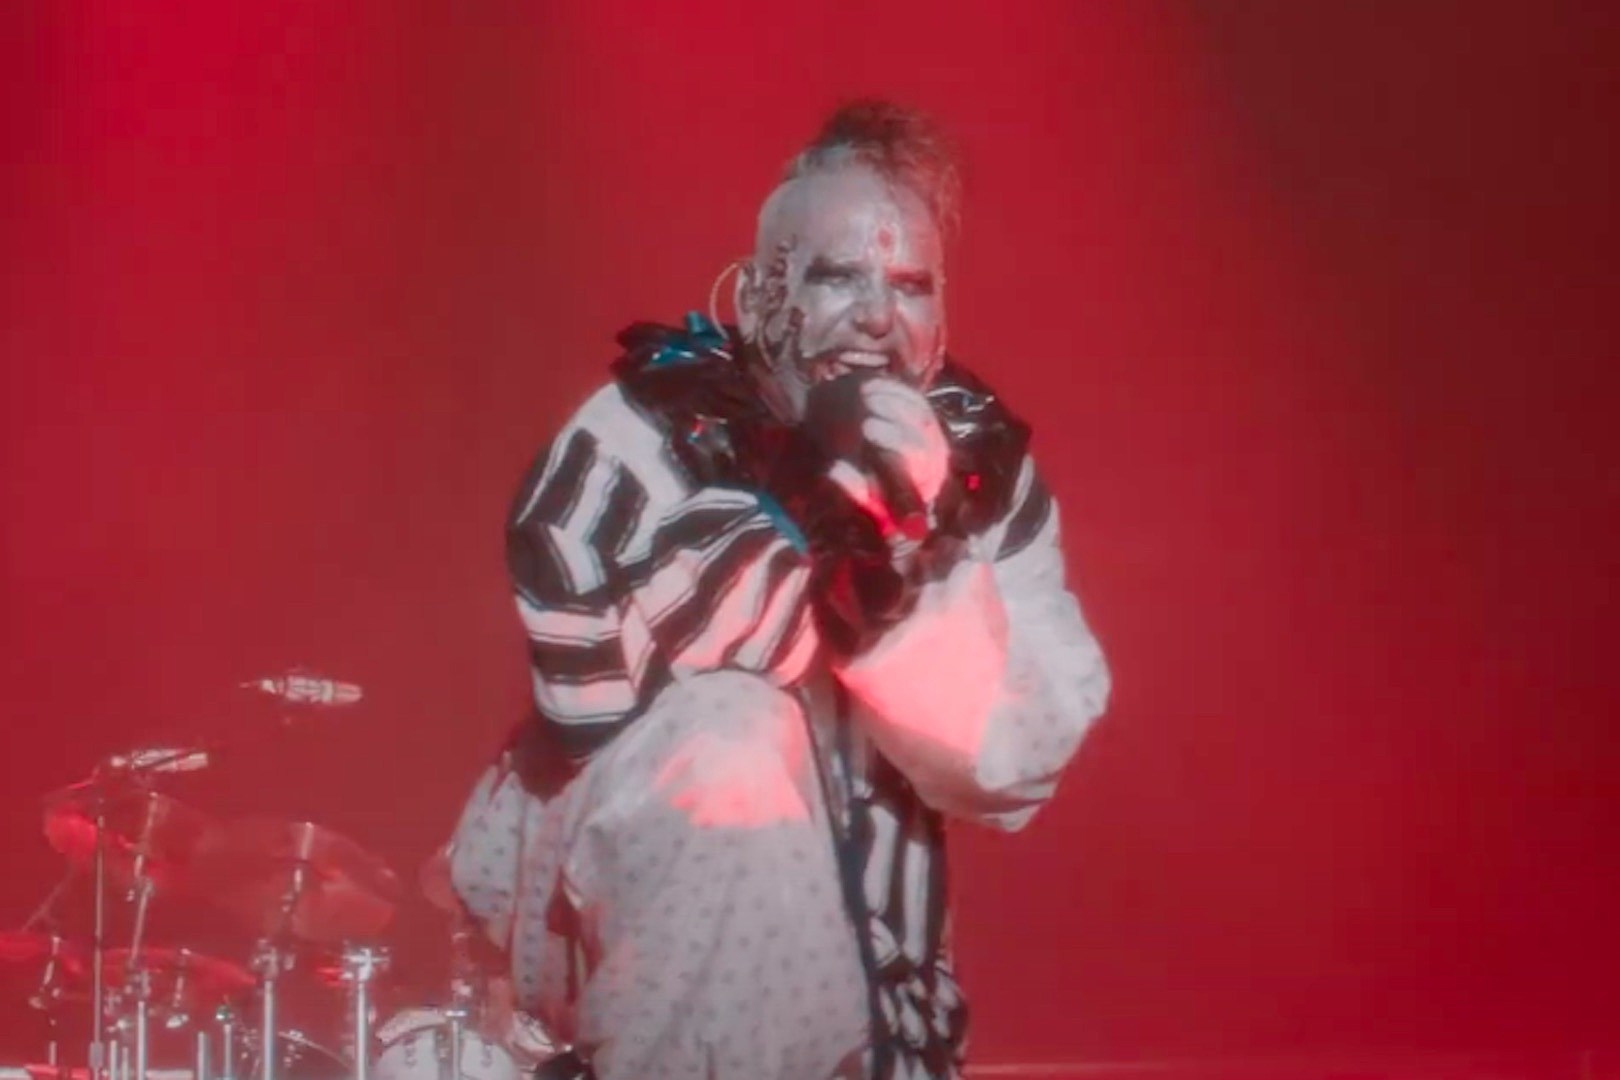 Mudvayne singer Chad Gray performs onstage with the band at their 2021 reunionshow.